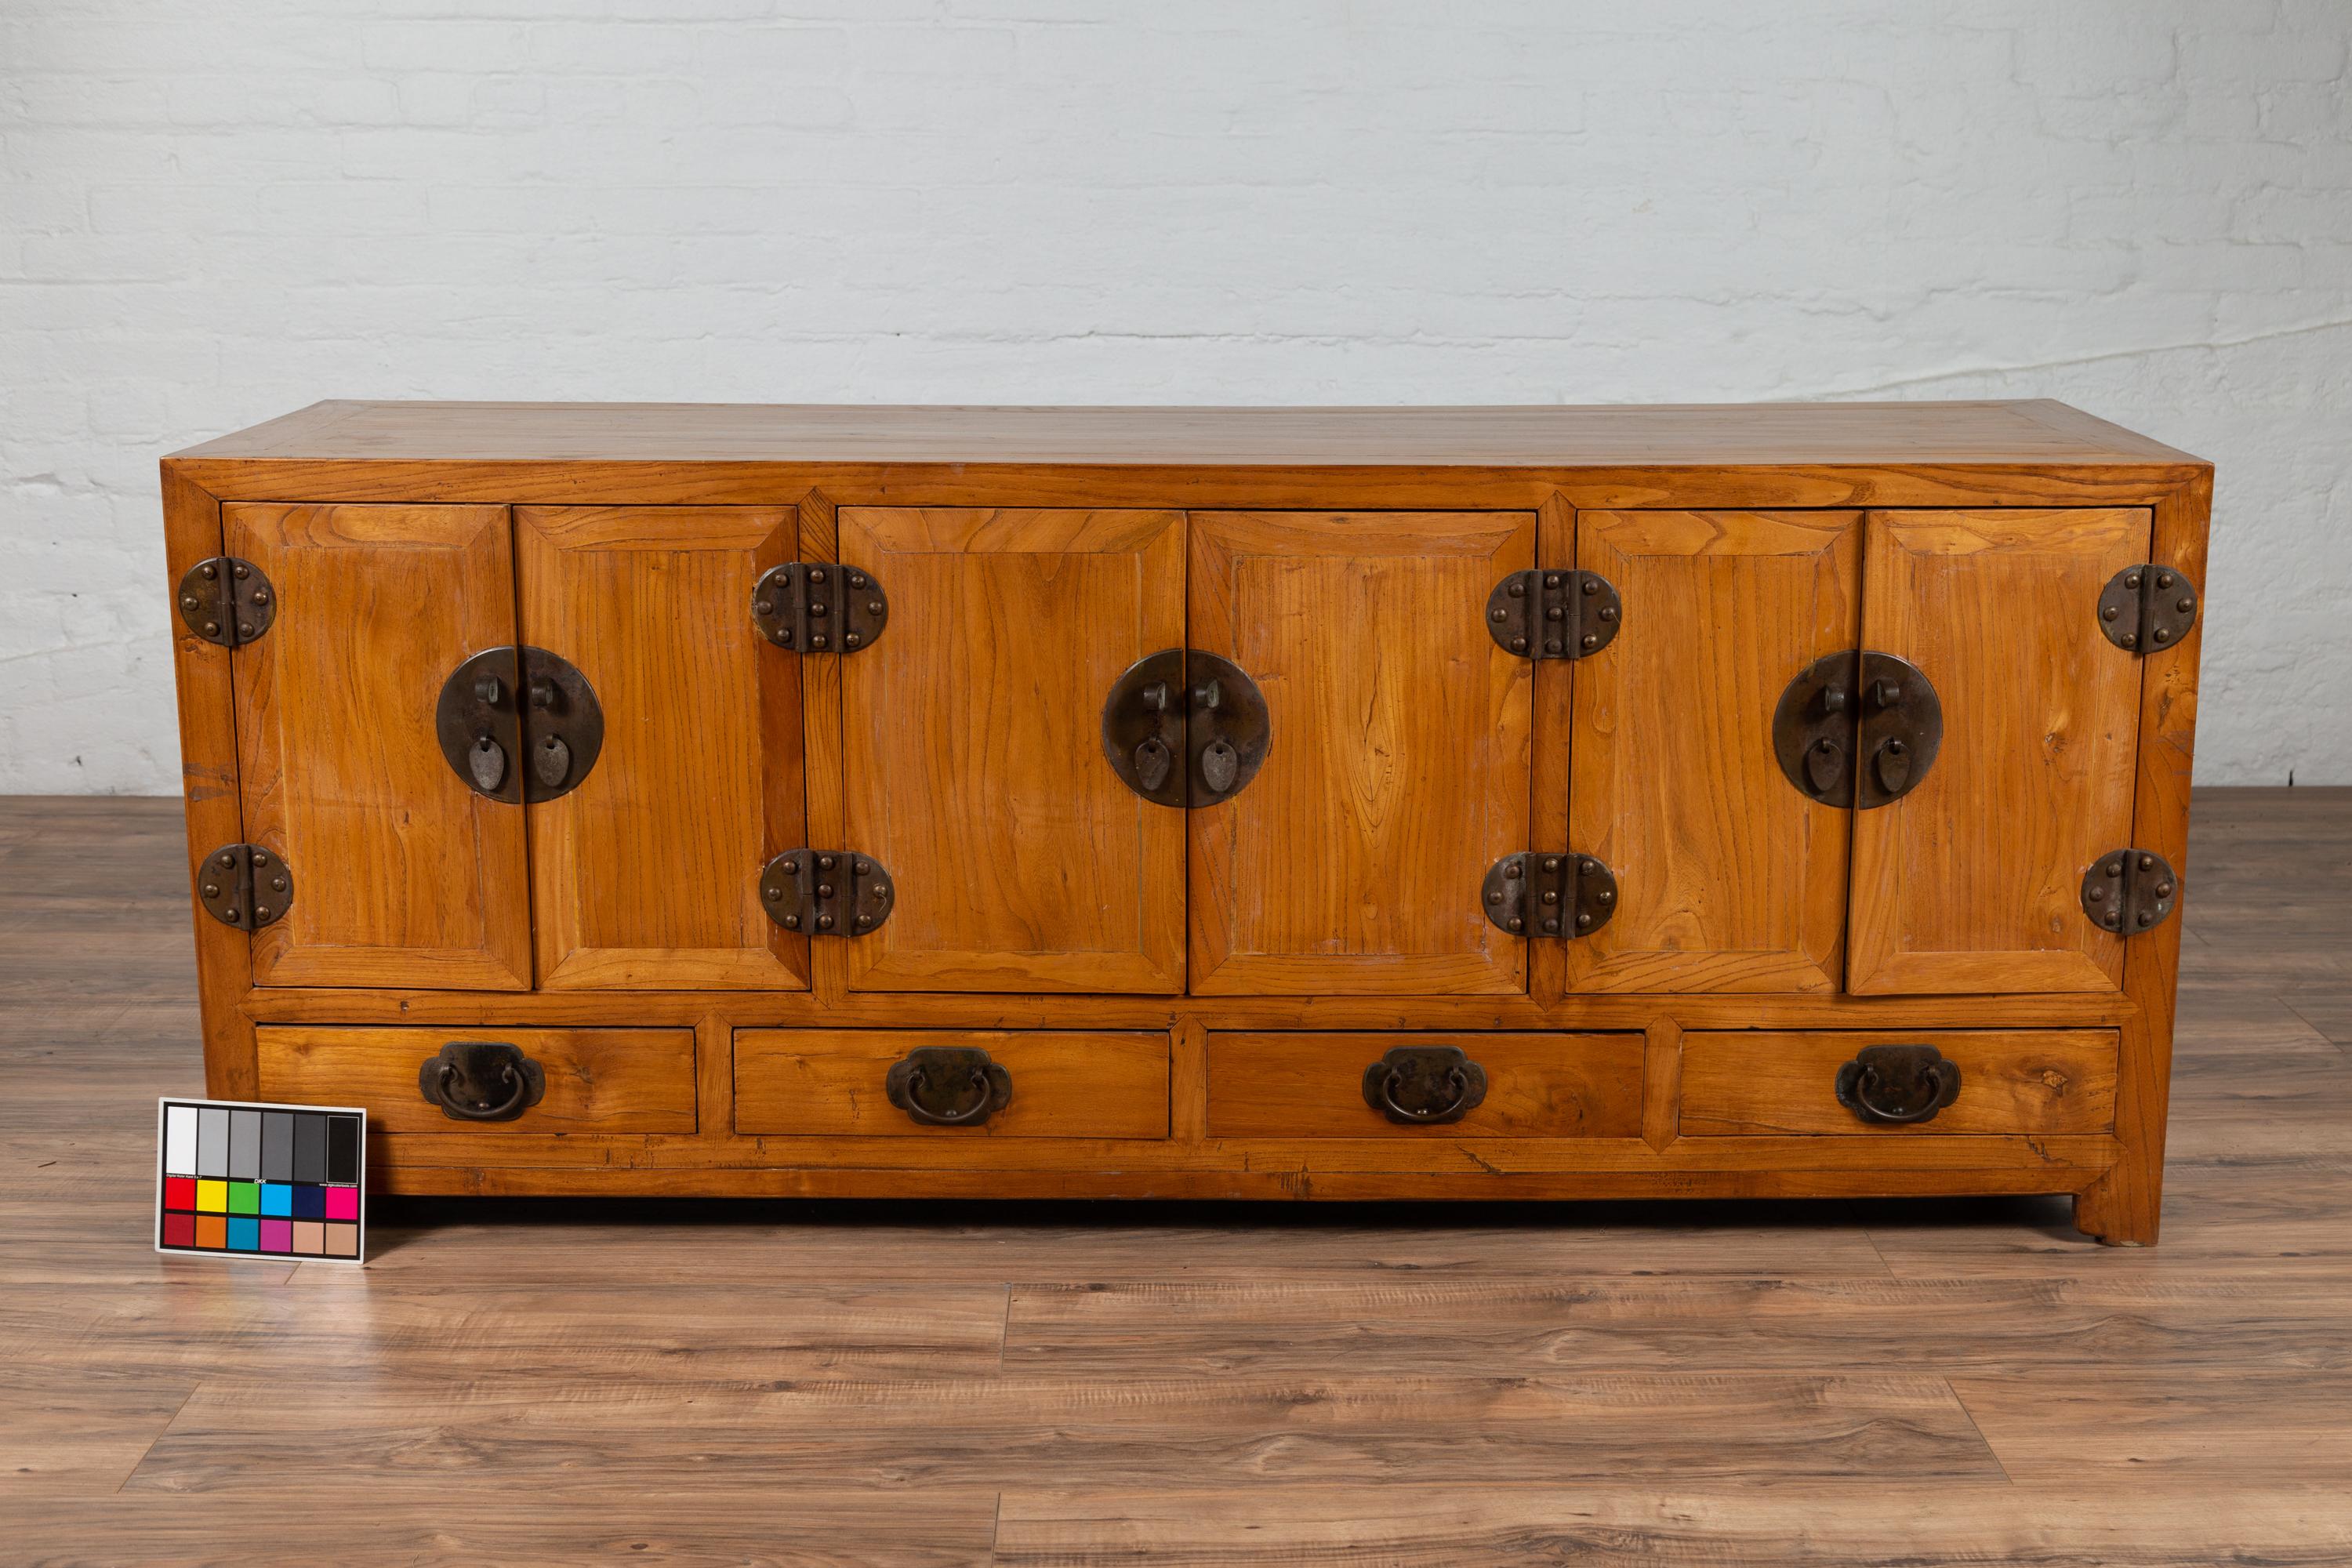 A Chinese elm low Kang cabinet from the 19th century, with three sets of double doors and four drawers. Born in China during the 19th century, this low Kang cabinet features three sets of double doors sitting above four lower drawers. Each pair of